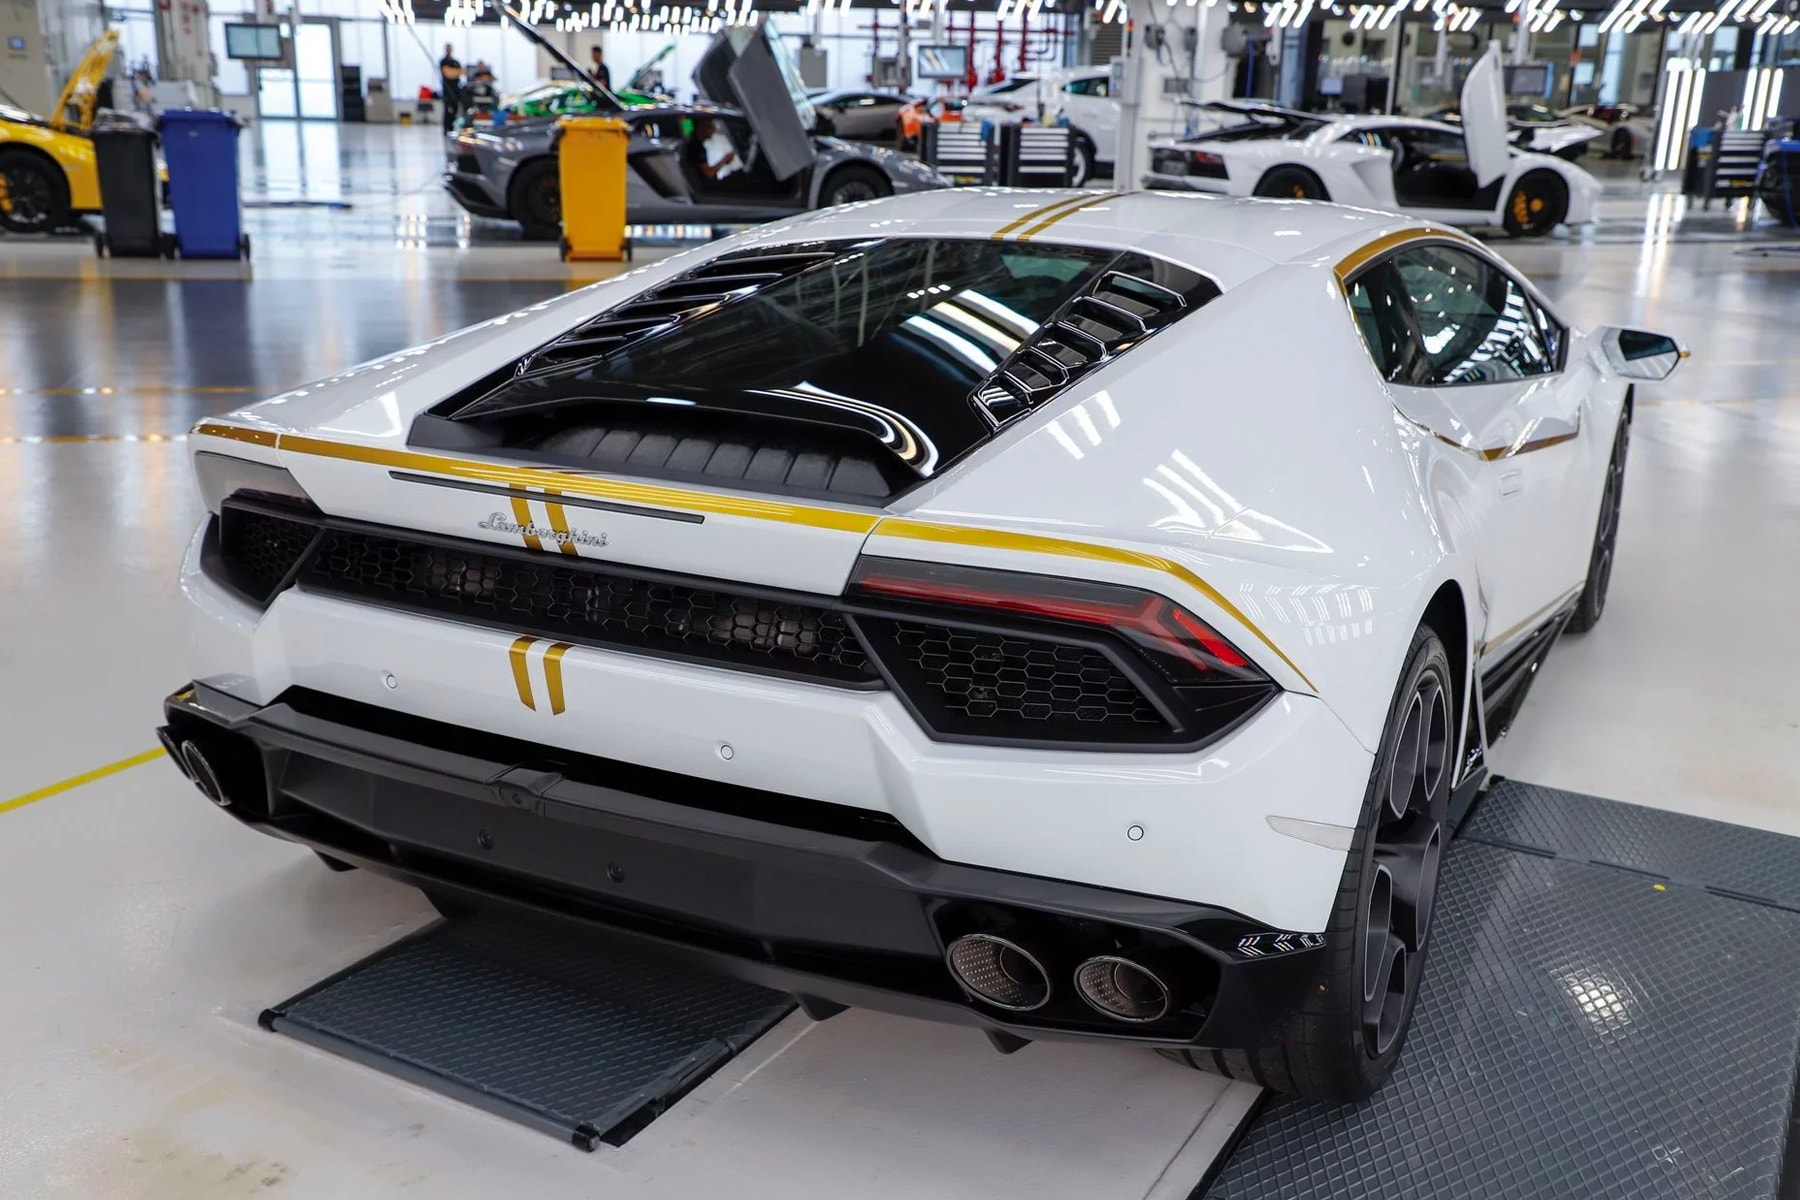 Pope Francis Lamborghini Huracan Auction price purchase 2018 sports car charity